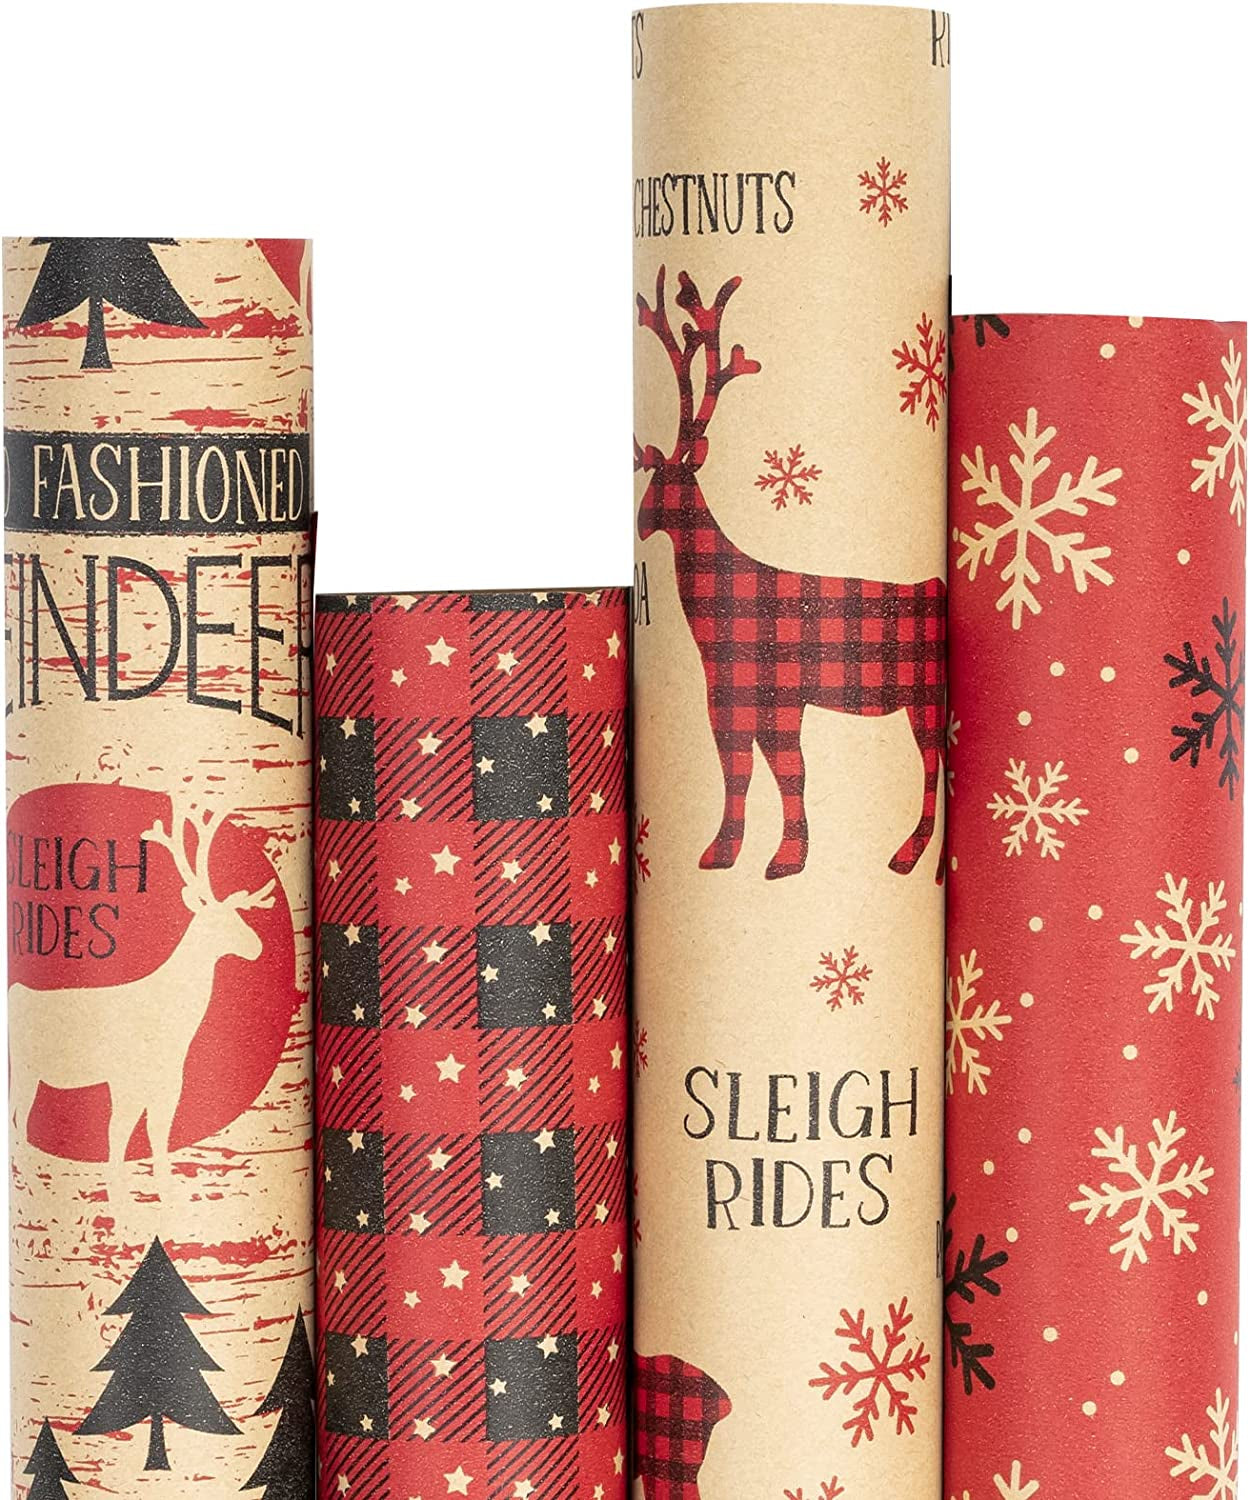 Christmas Wrapping Paper, Kraft Paper - Red and Black Christmas Designs - 4 Rolls - 30 Inches X 10 Feet per Roll